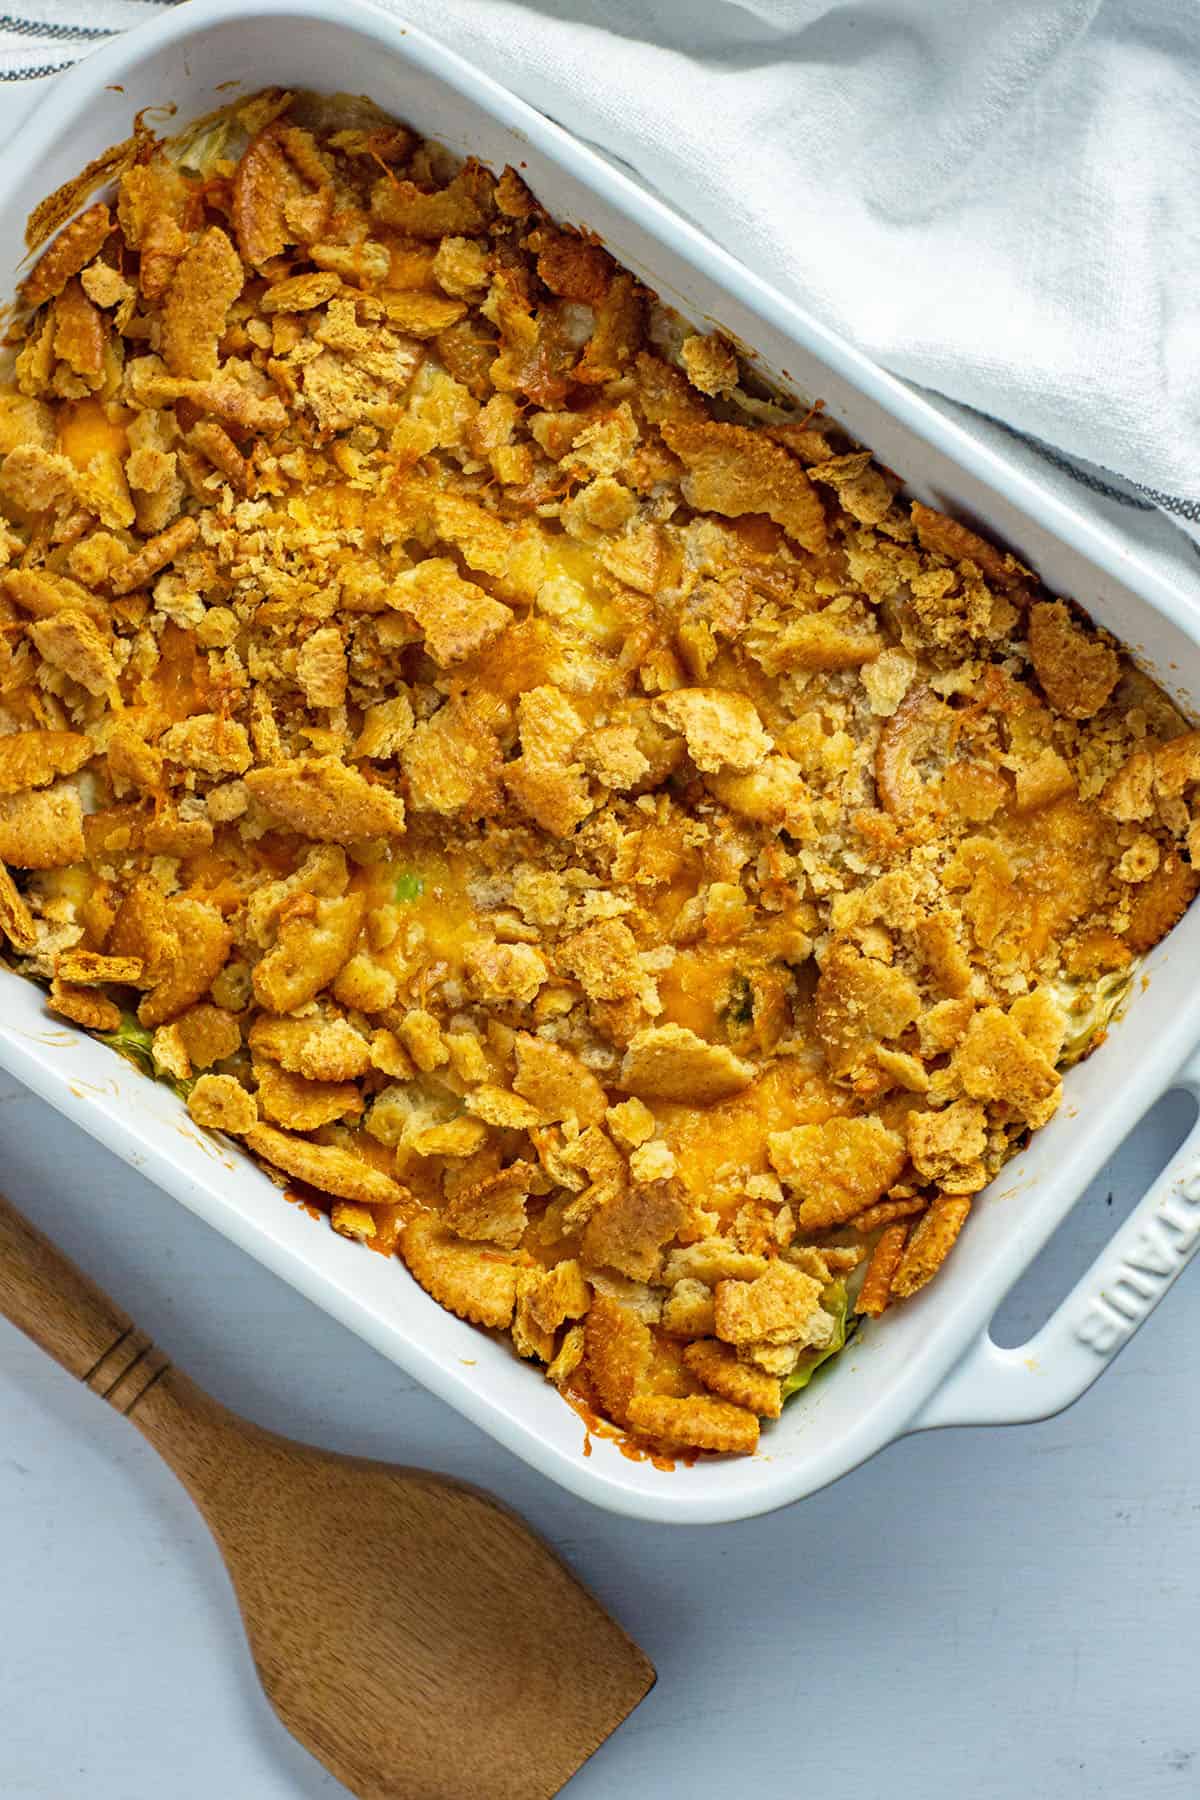 baked casserole in a white oblong dish with wooden serving spoon on the side